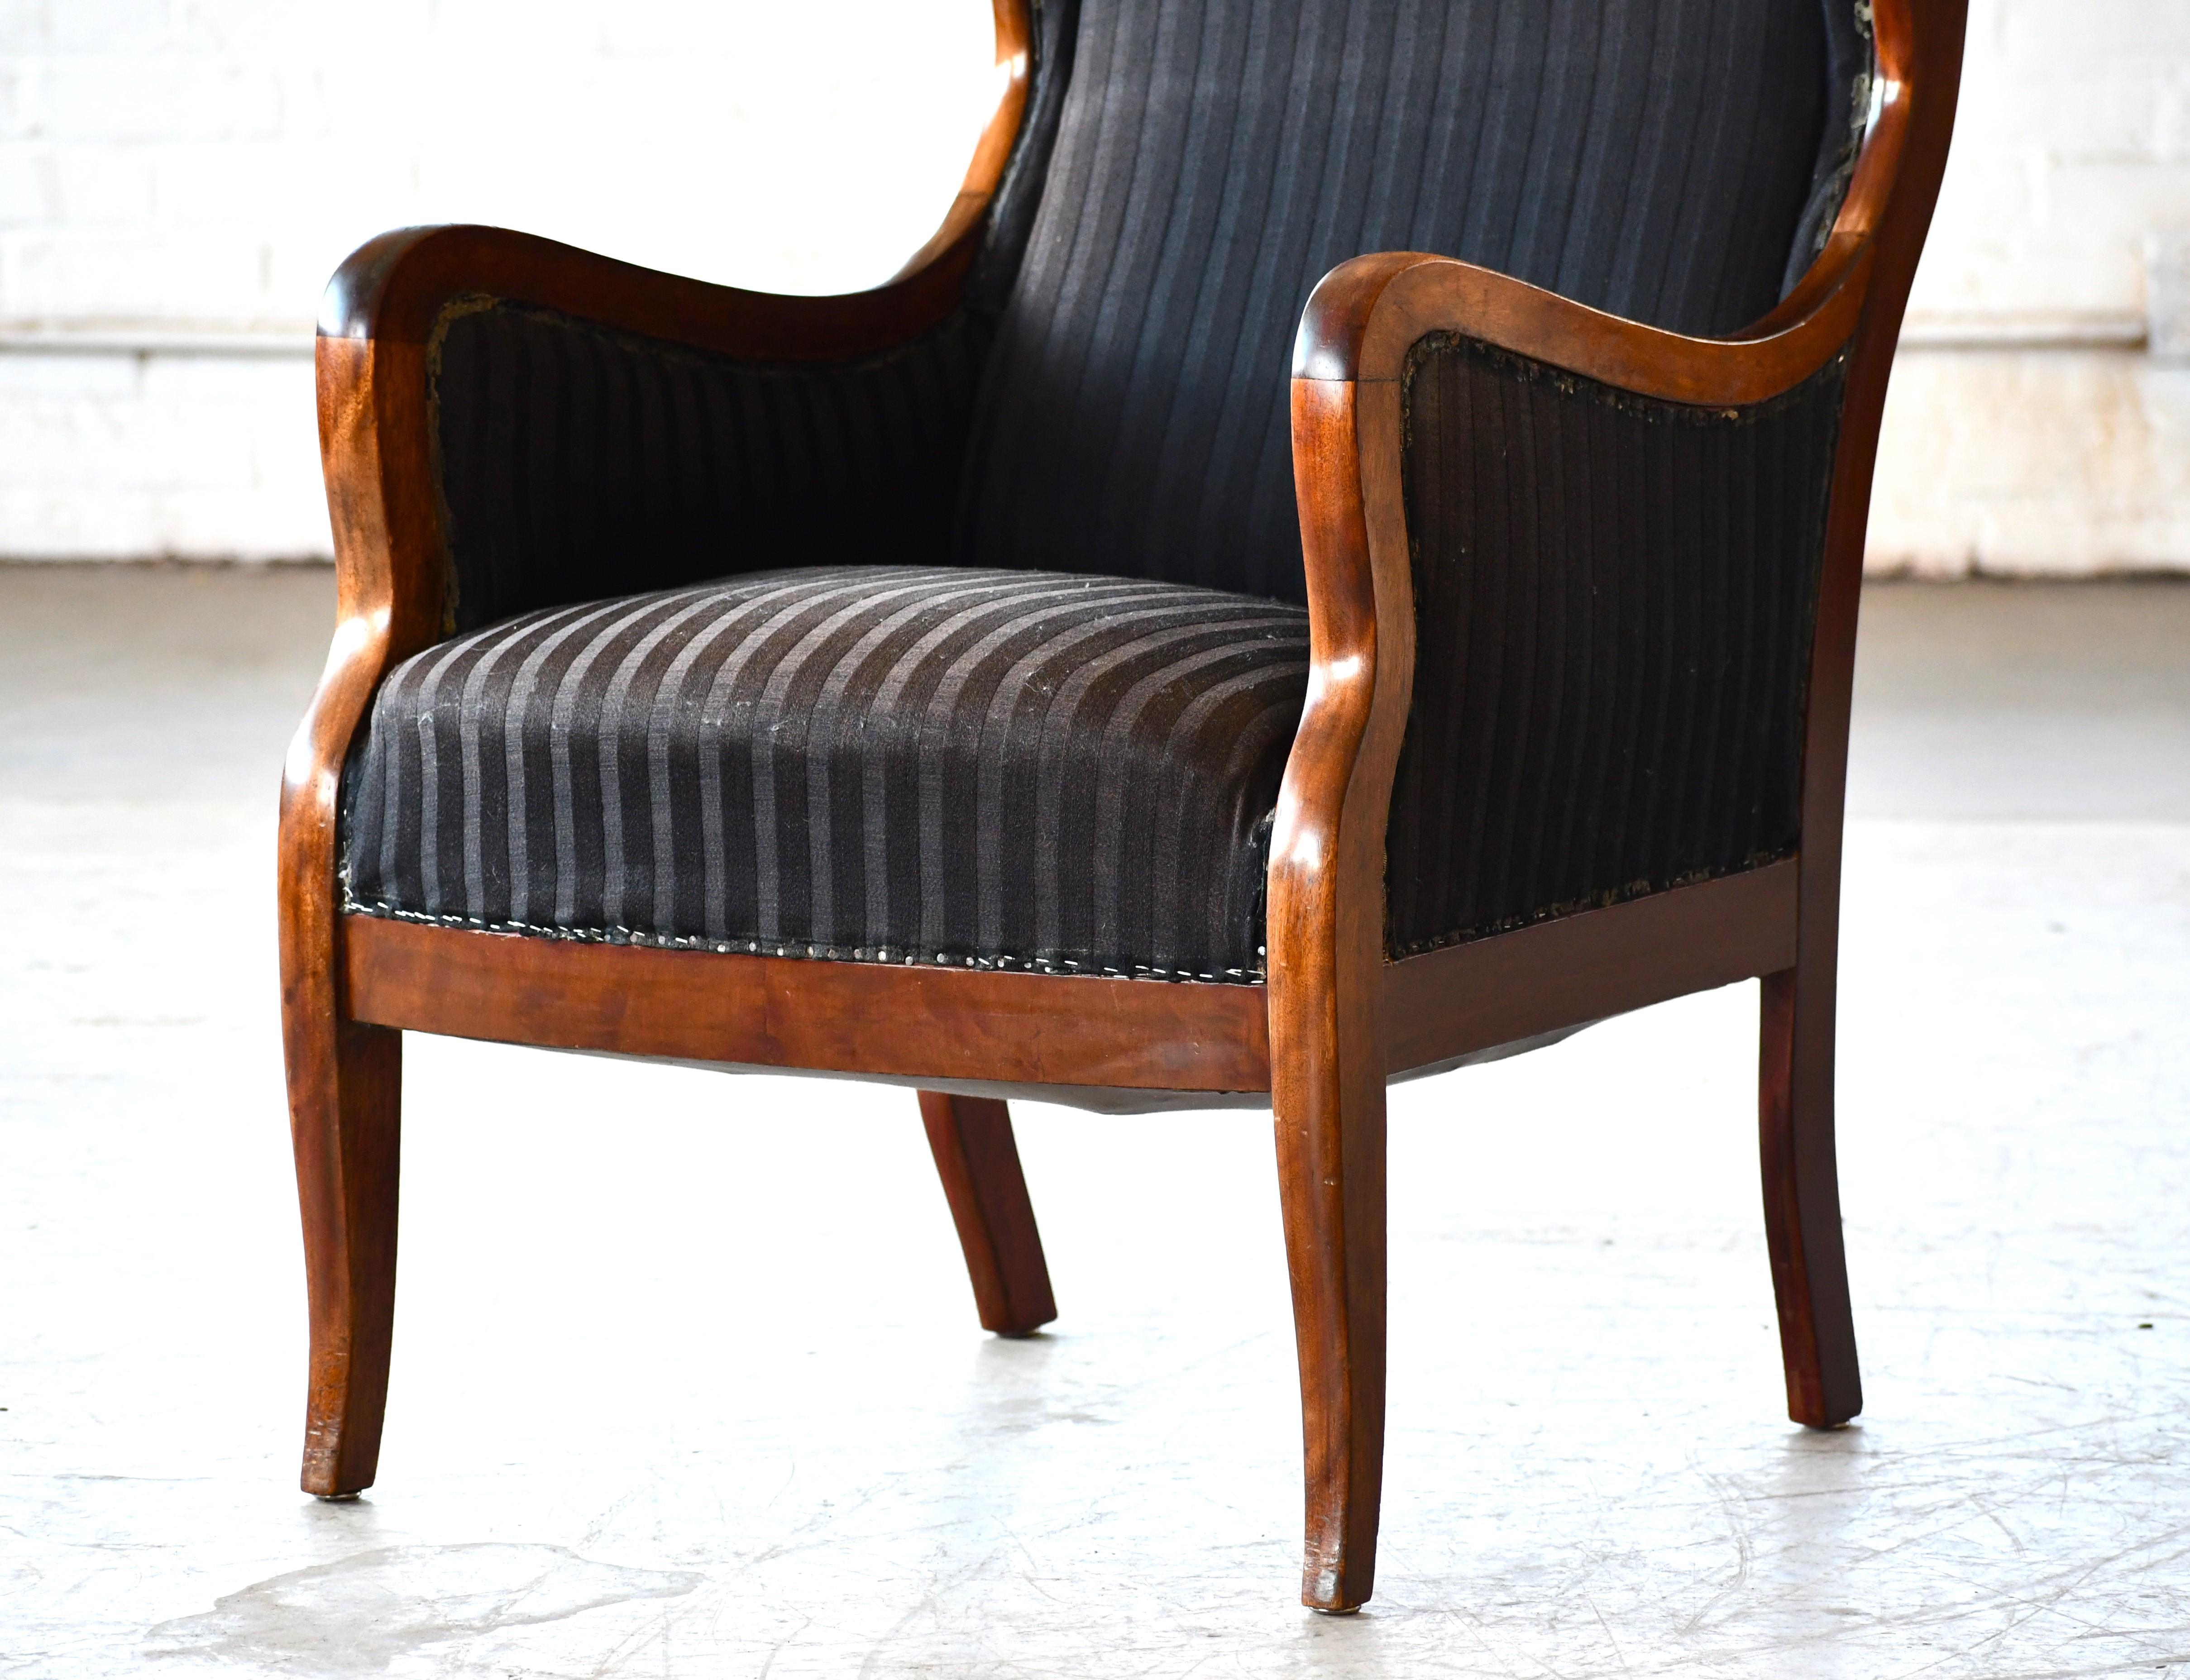 Danish 1940s Wingback Chair in Beech by Master Carpenter Frits Henningsen In Good Condition For Sale In Bridgeport, CT